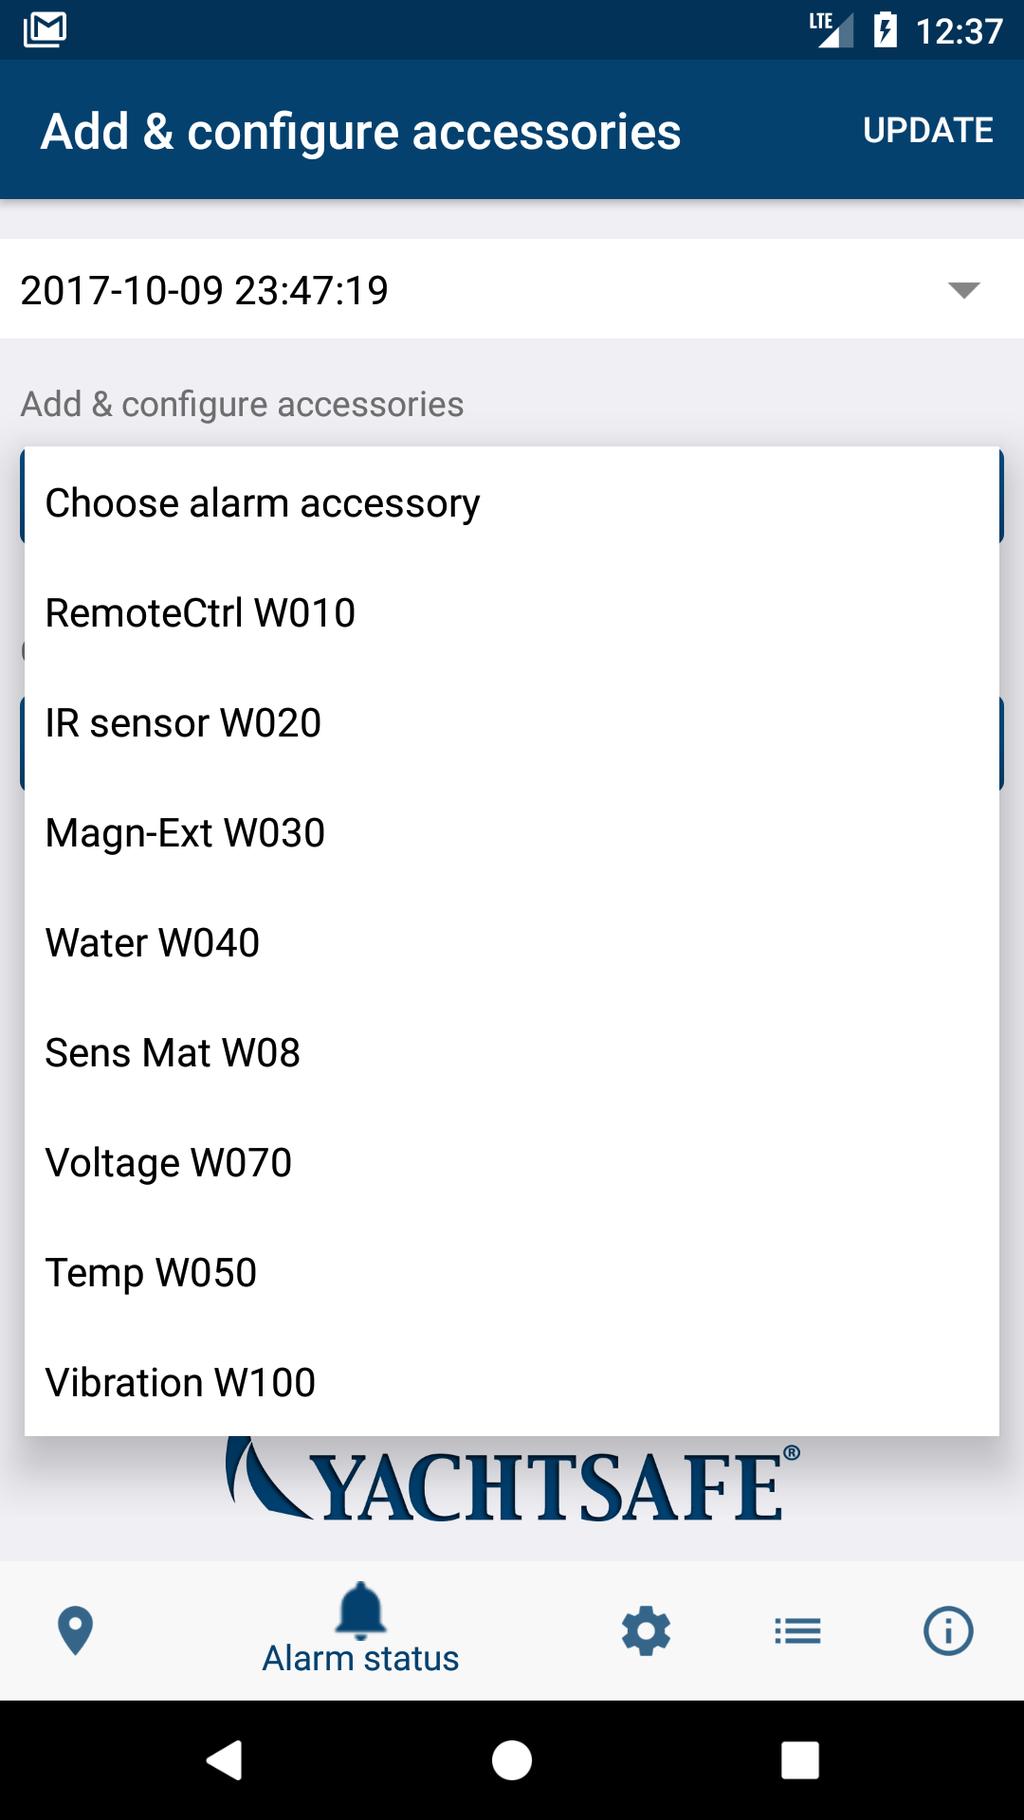 accessories IMAGE 3 ios: New accessory Android: Choose